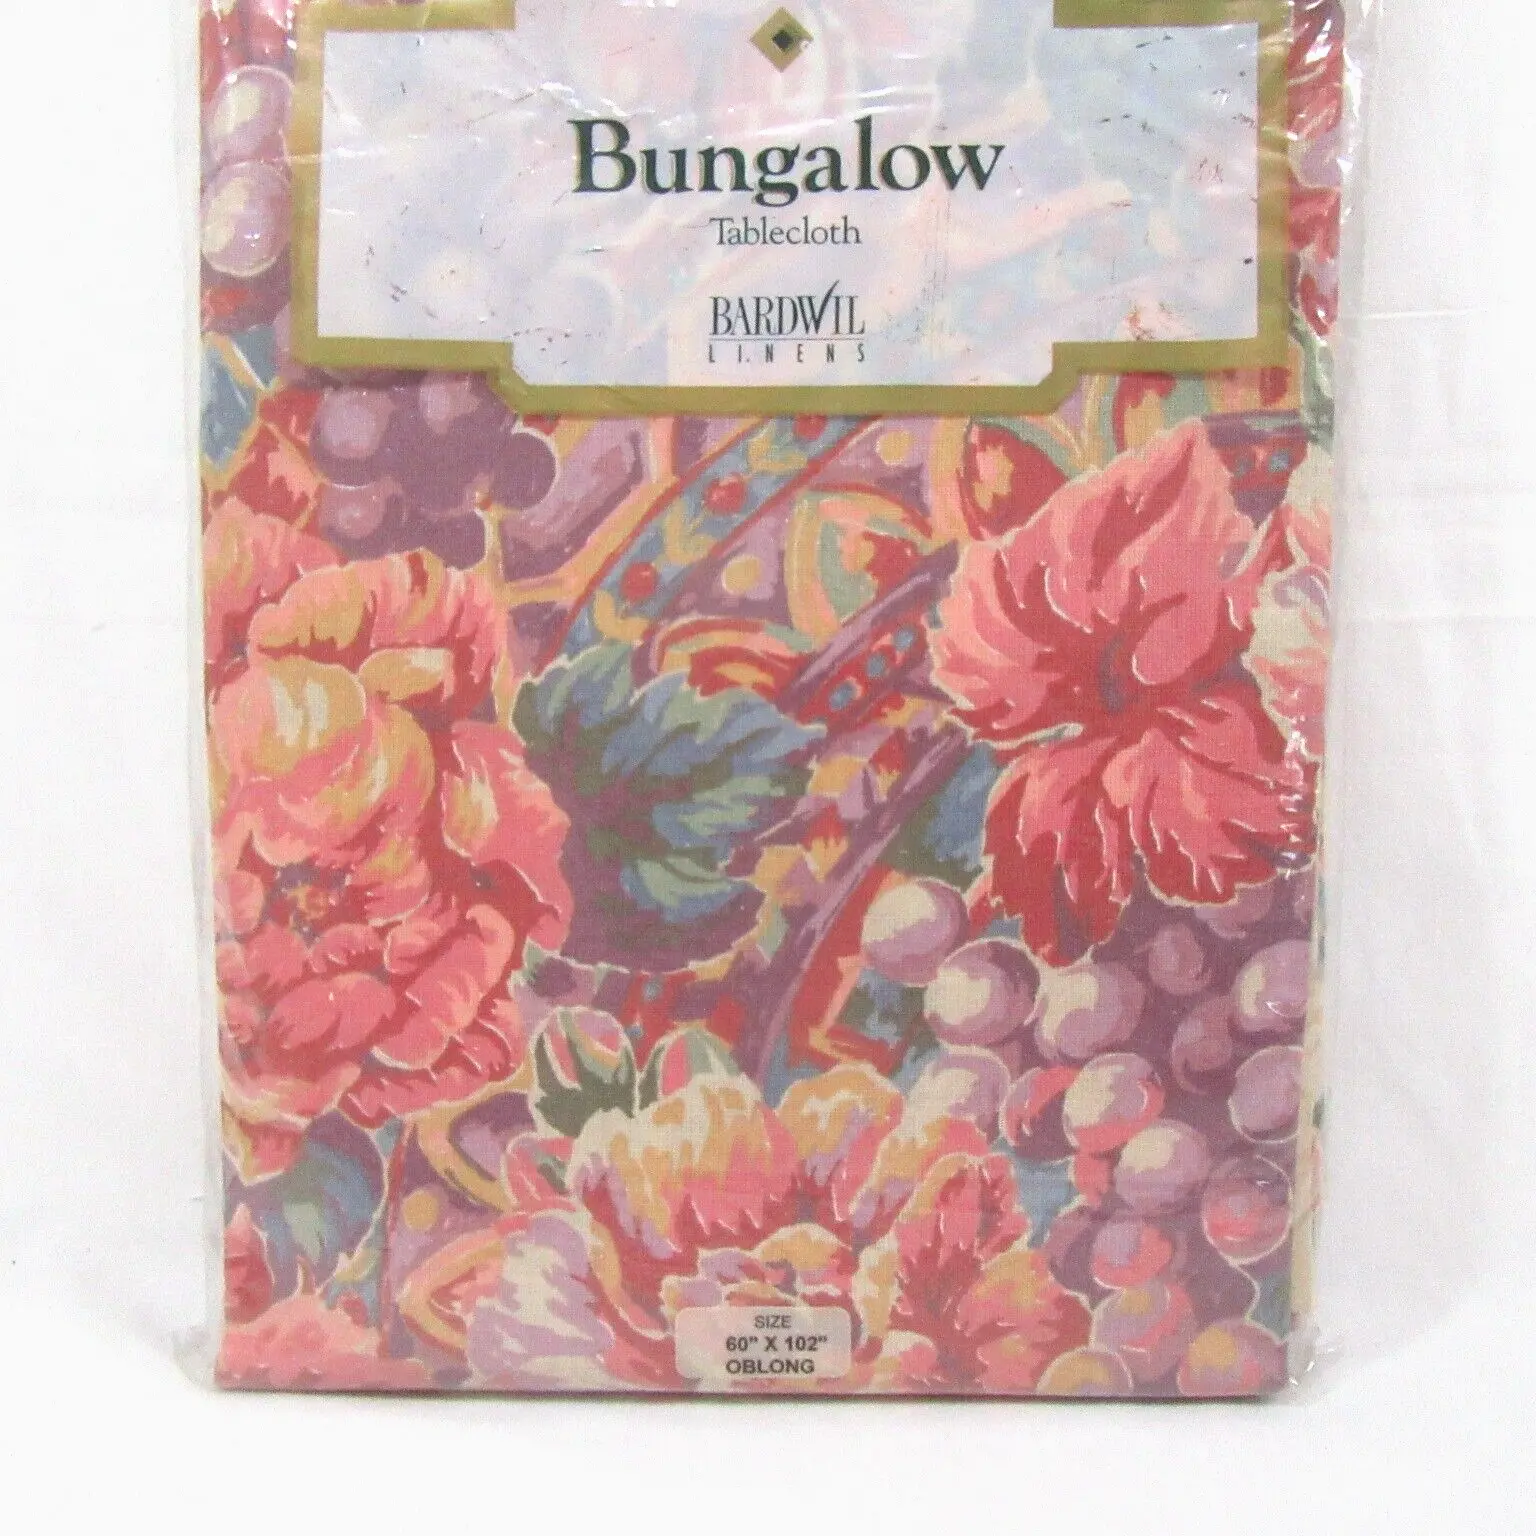 BARDWIL Bungalow Floral and Fruit Multi 60x 102 Oblong Tablecloth - $36.00